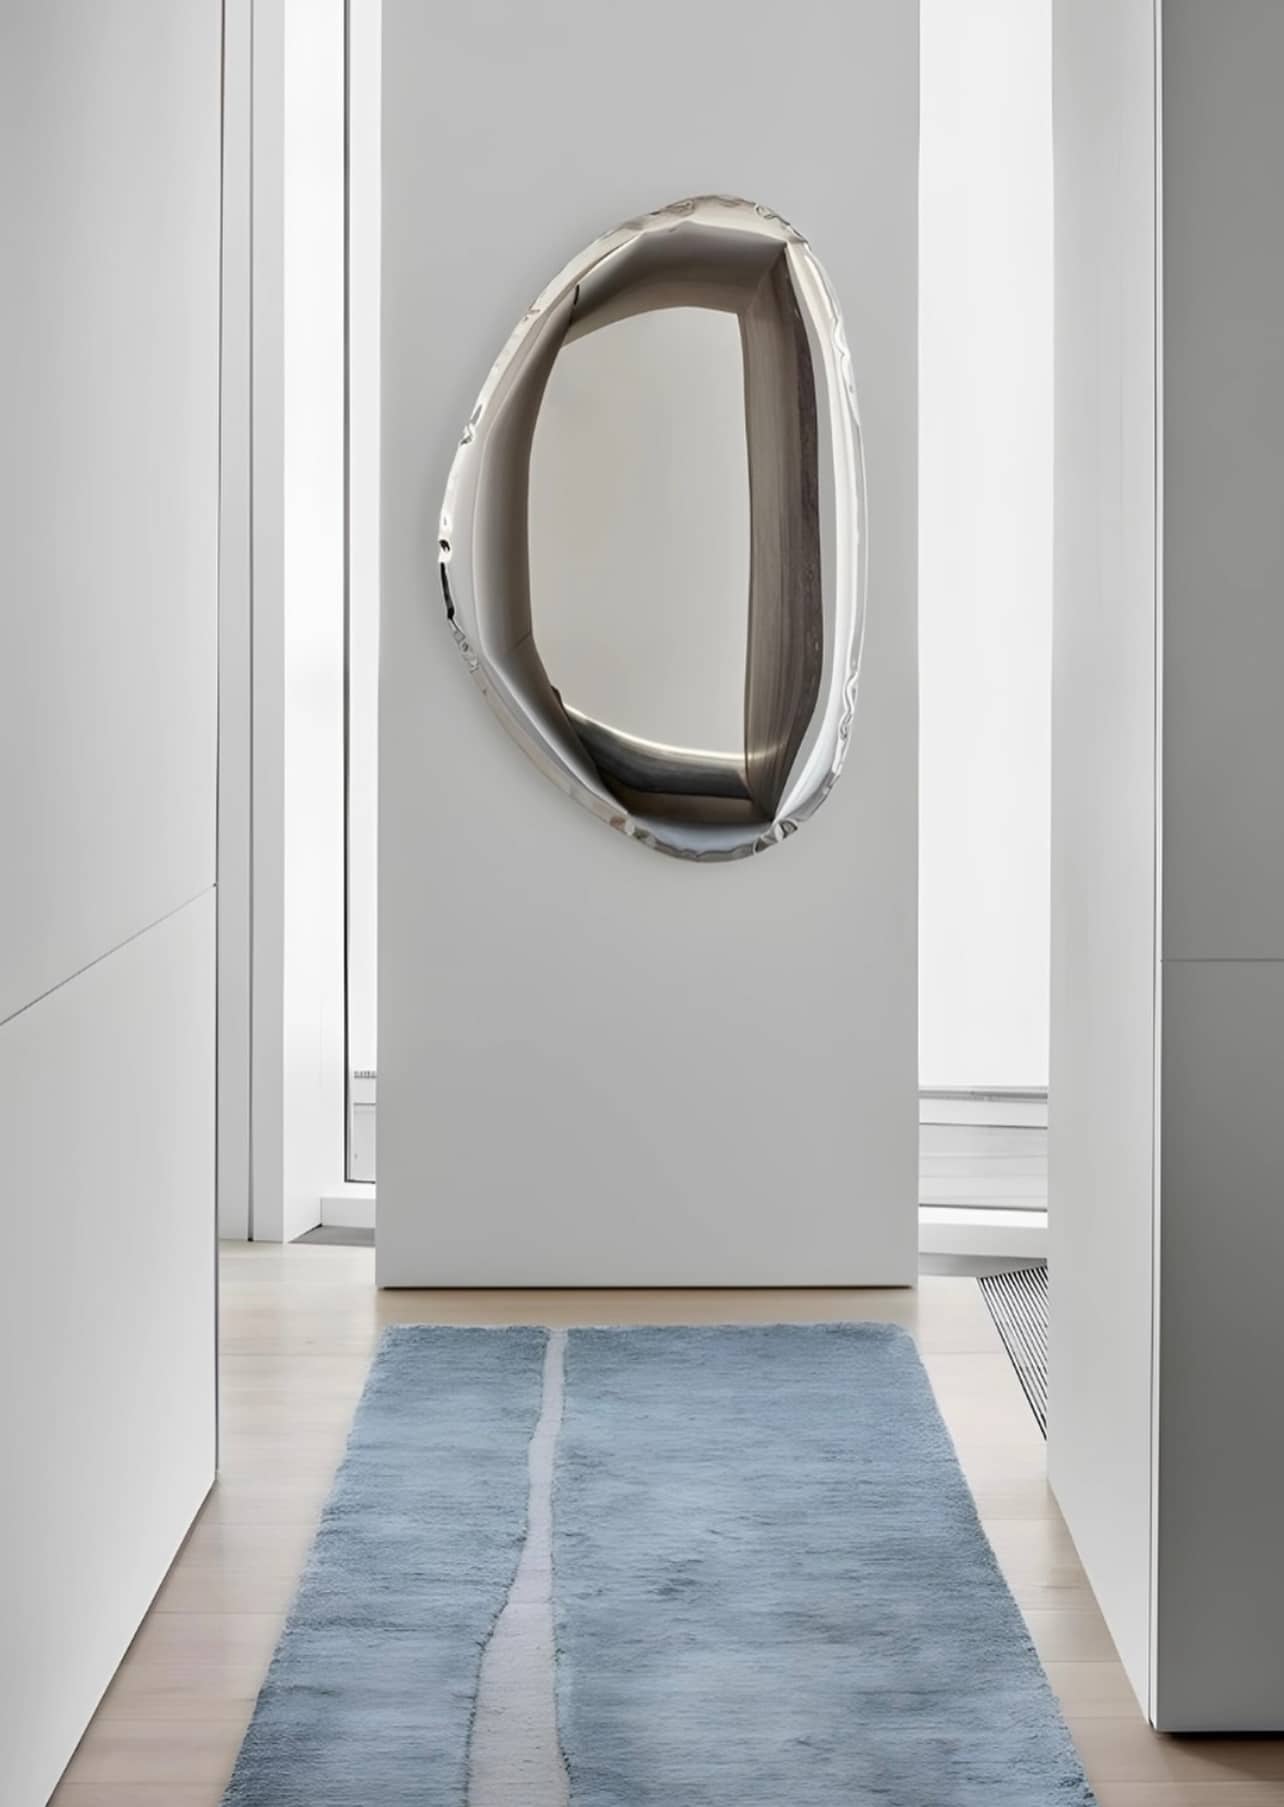 A modern, elongated Pebble Mirror 97 x 150 cm with a reflective metallic frame, mounted on a white wall at the end of a narrow hallway with a light blue runner rug on the floor.